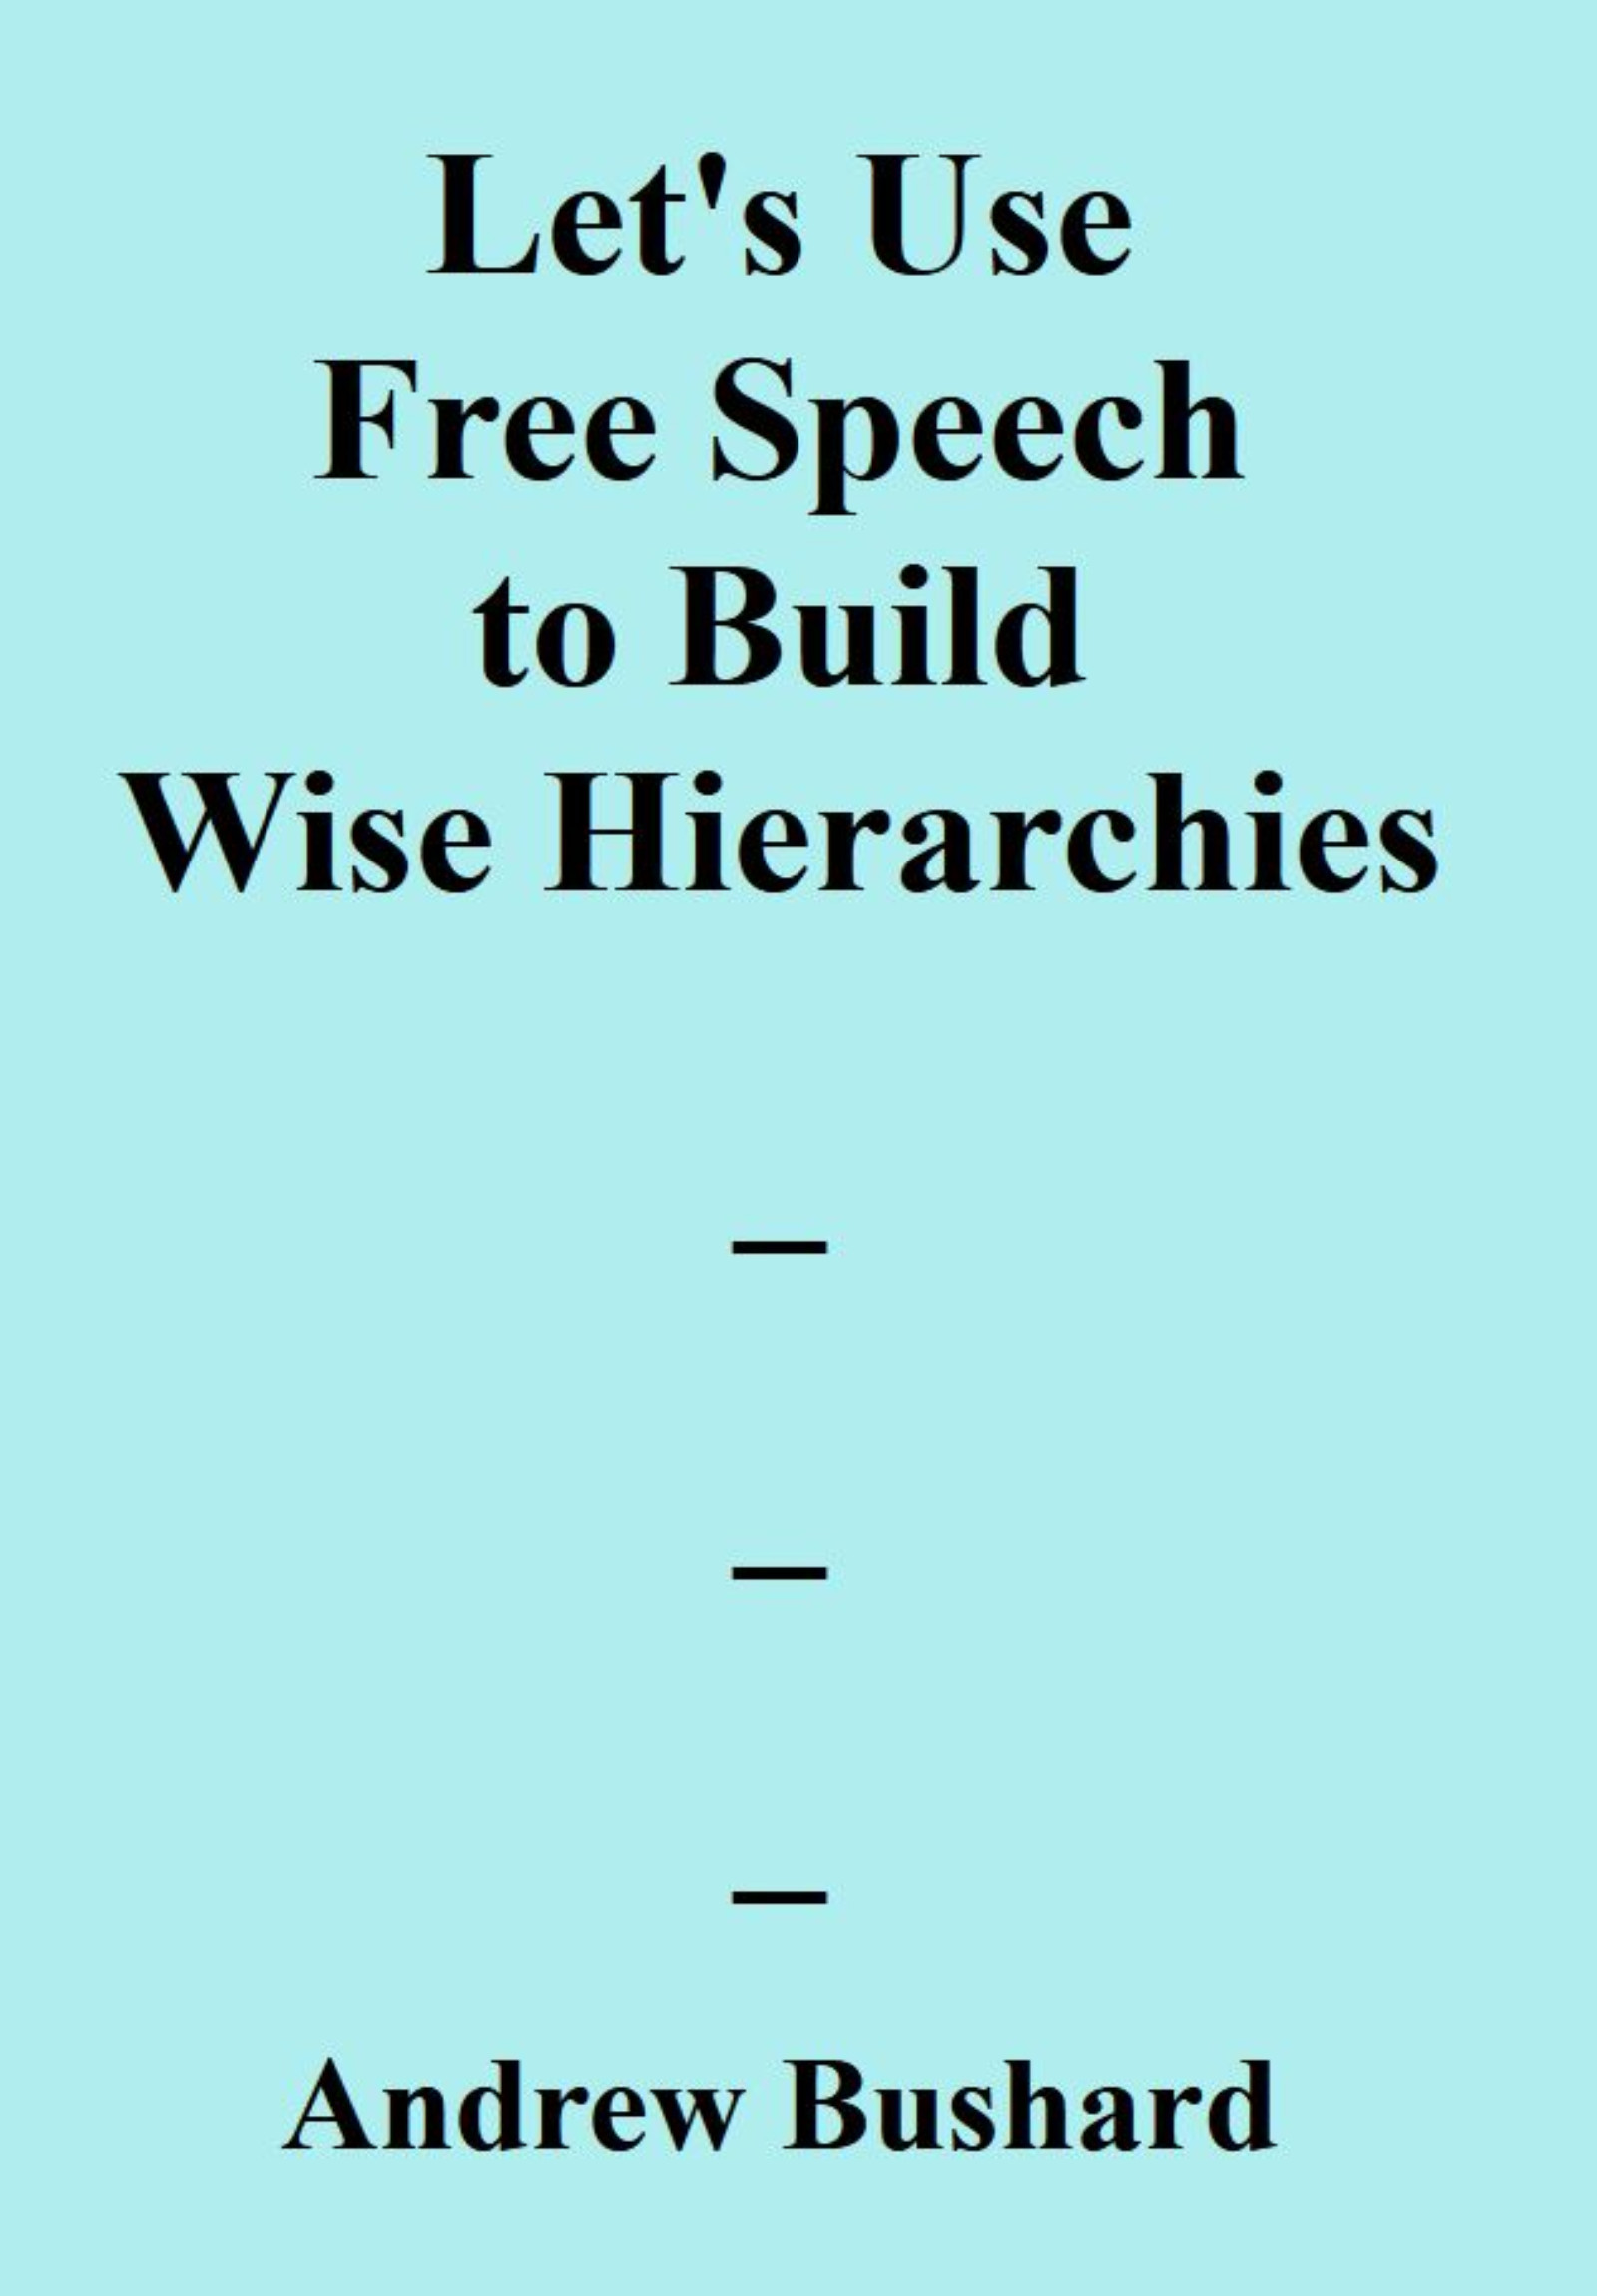 Let's Use Free Speech to Build Wise Hierarchies's featured image